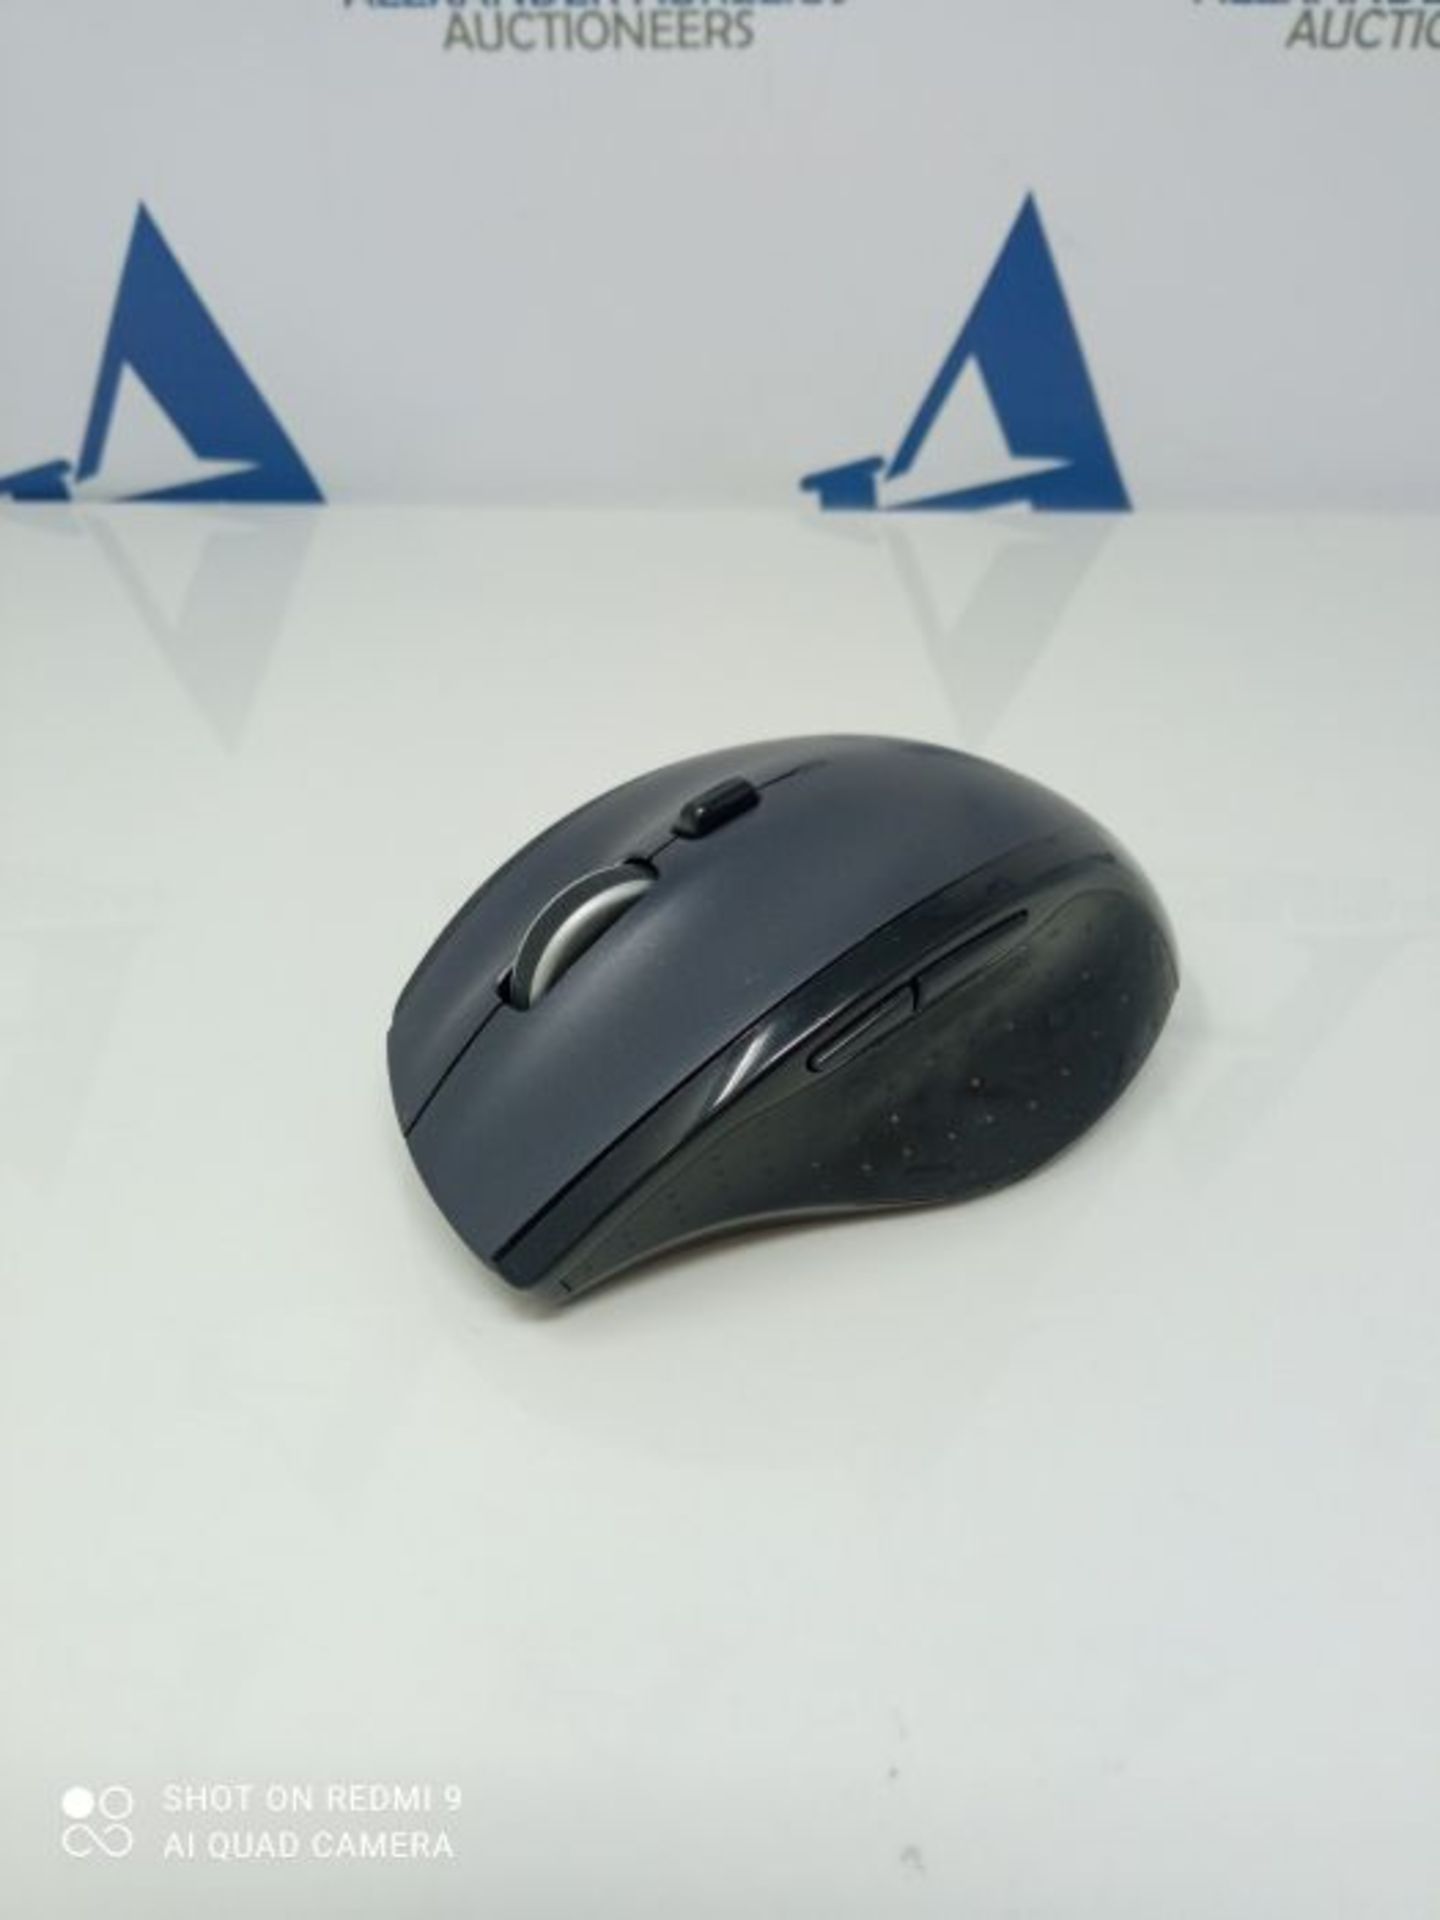 Logitech M705 Marathon Wireless Mouse, 2.4 GHz with USB Unifying Mini-Receiver, 1000 D - Image 3 of 3